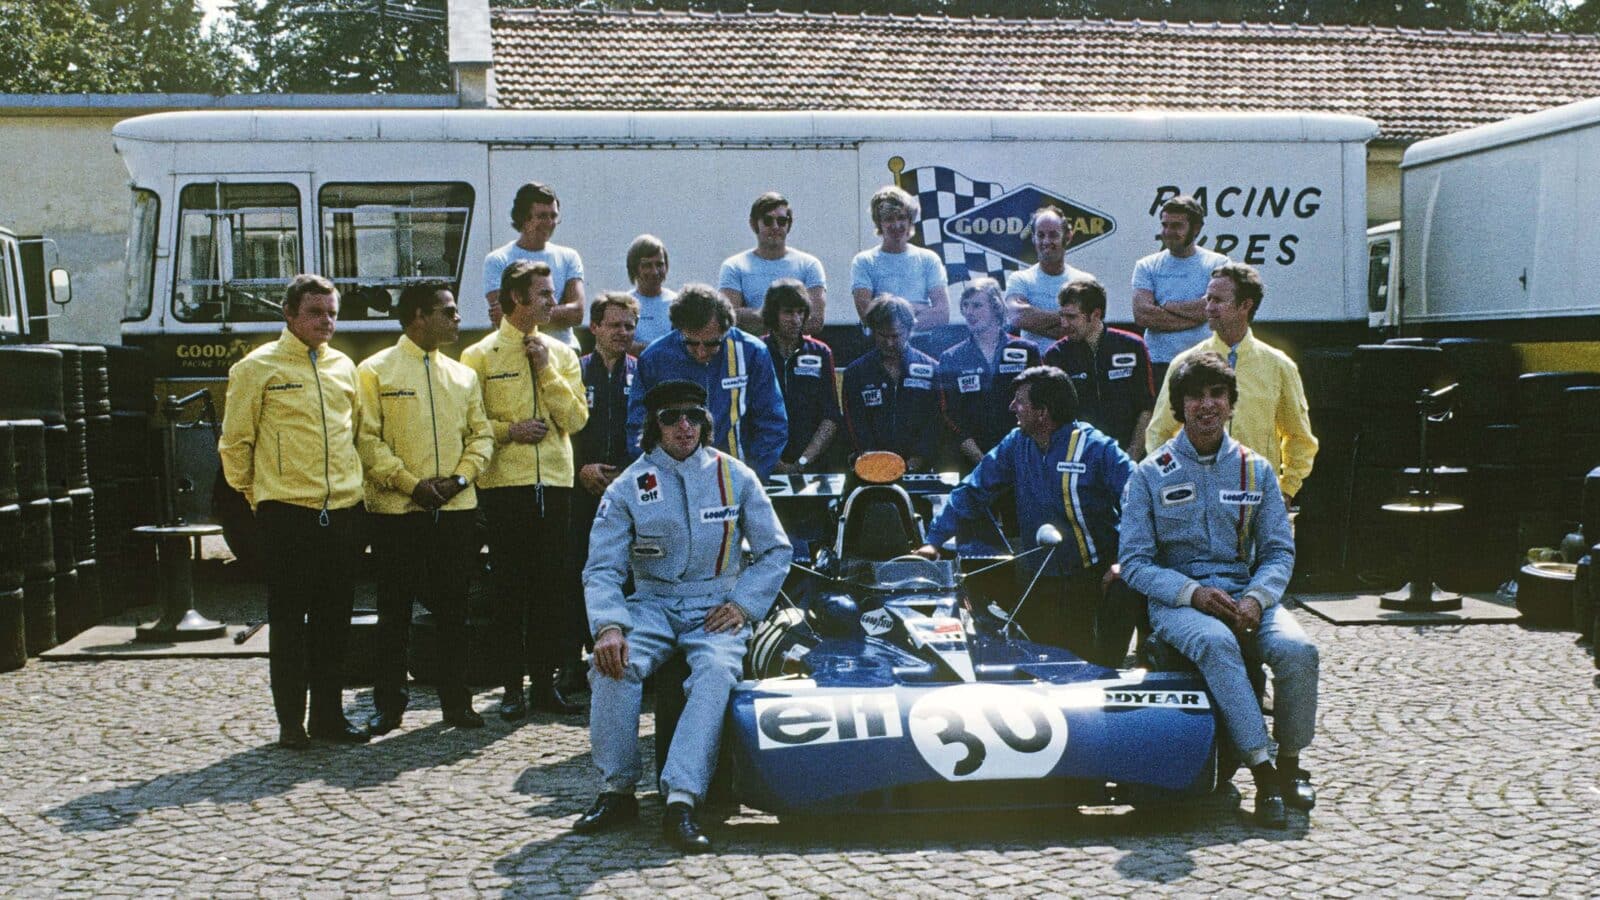 Tyrrell team photo at the Italian GP at Monza in 1971, with Stewart and Cevert